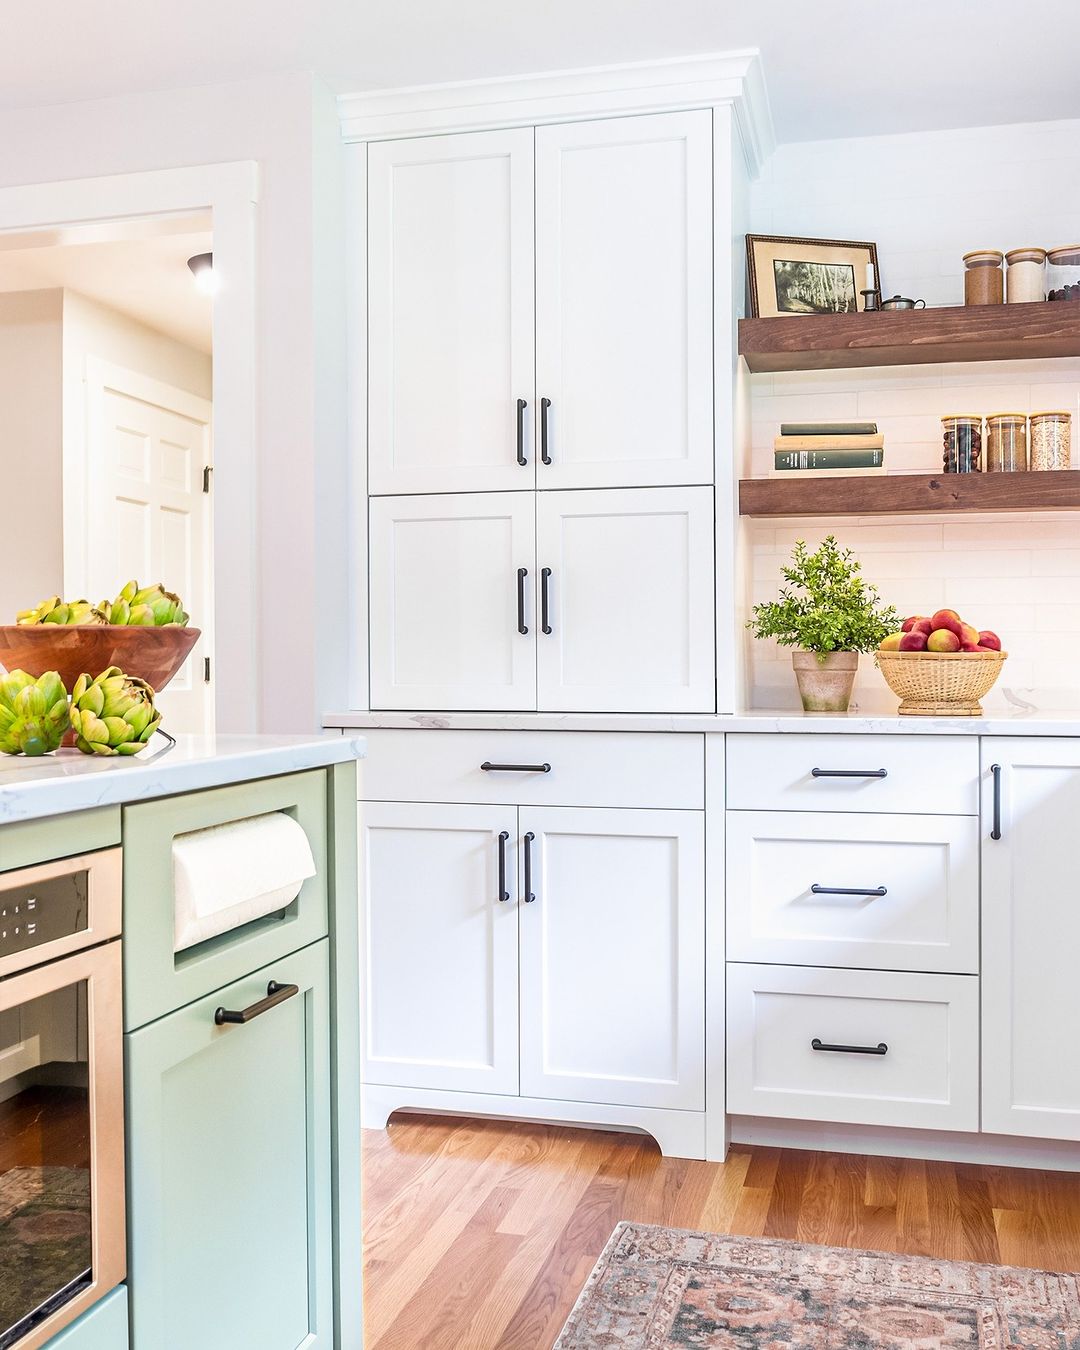 Fresh Simplicity: Shaker Cabinets with a Pop of Color